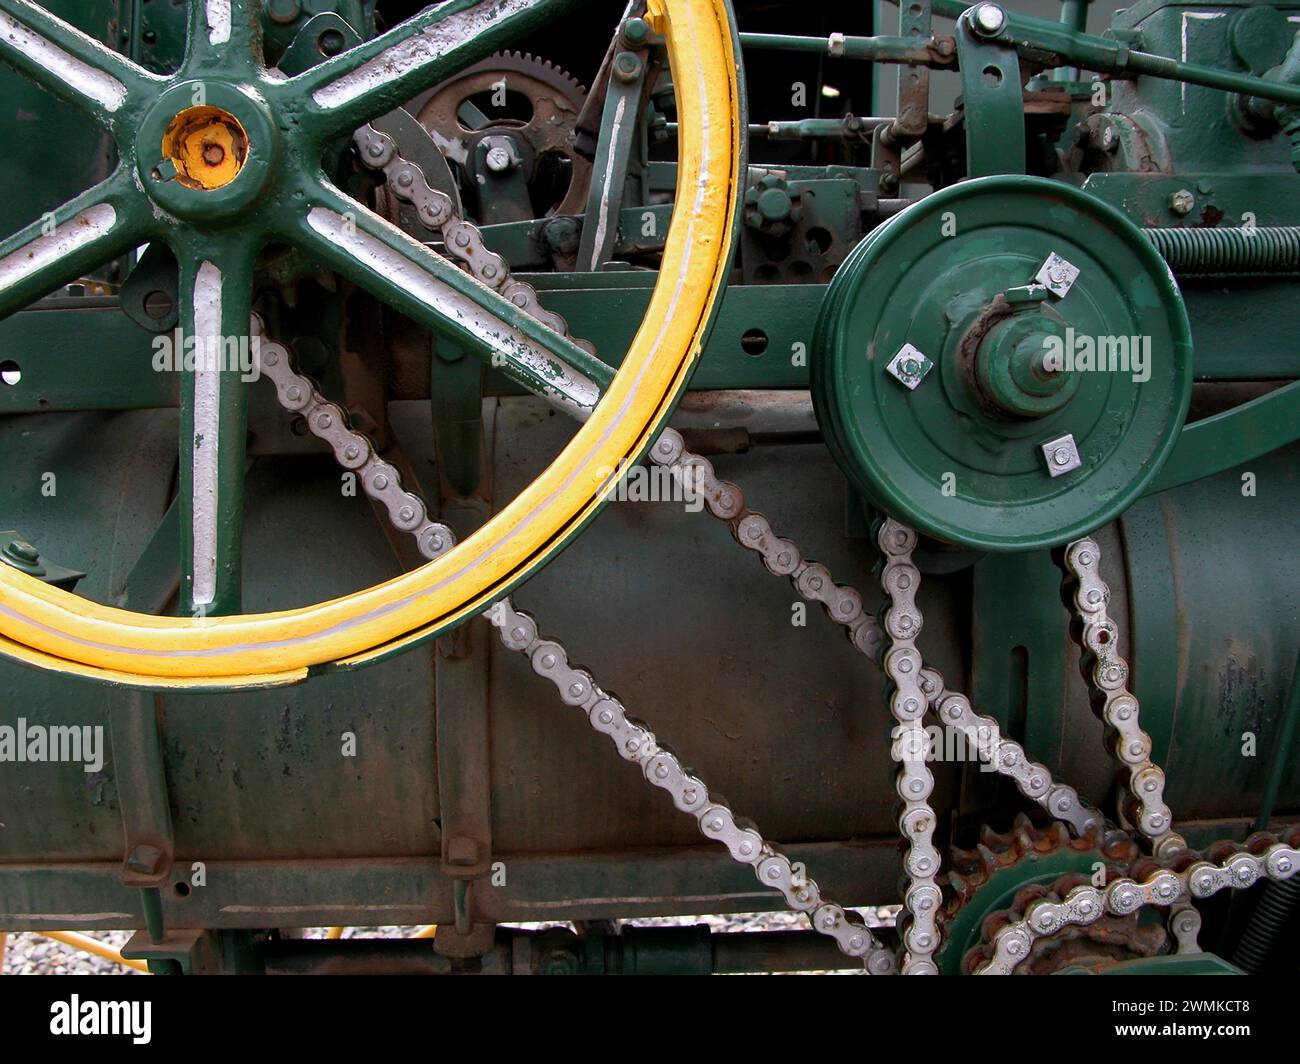 Close-up detail of machinery wheels with bicycle chains Stock Photo